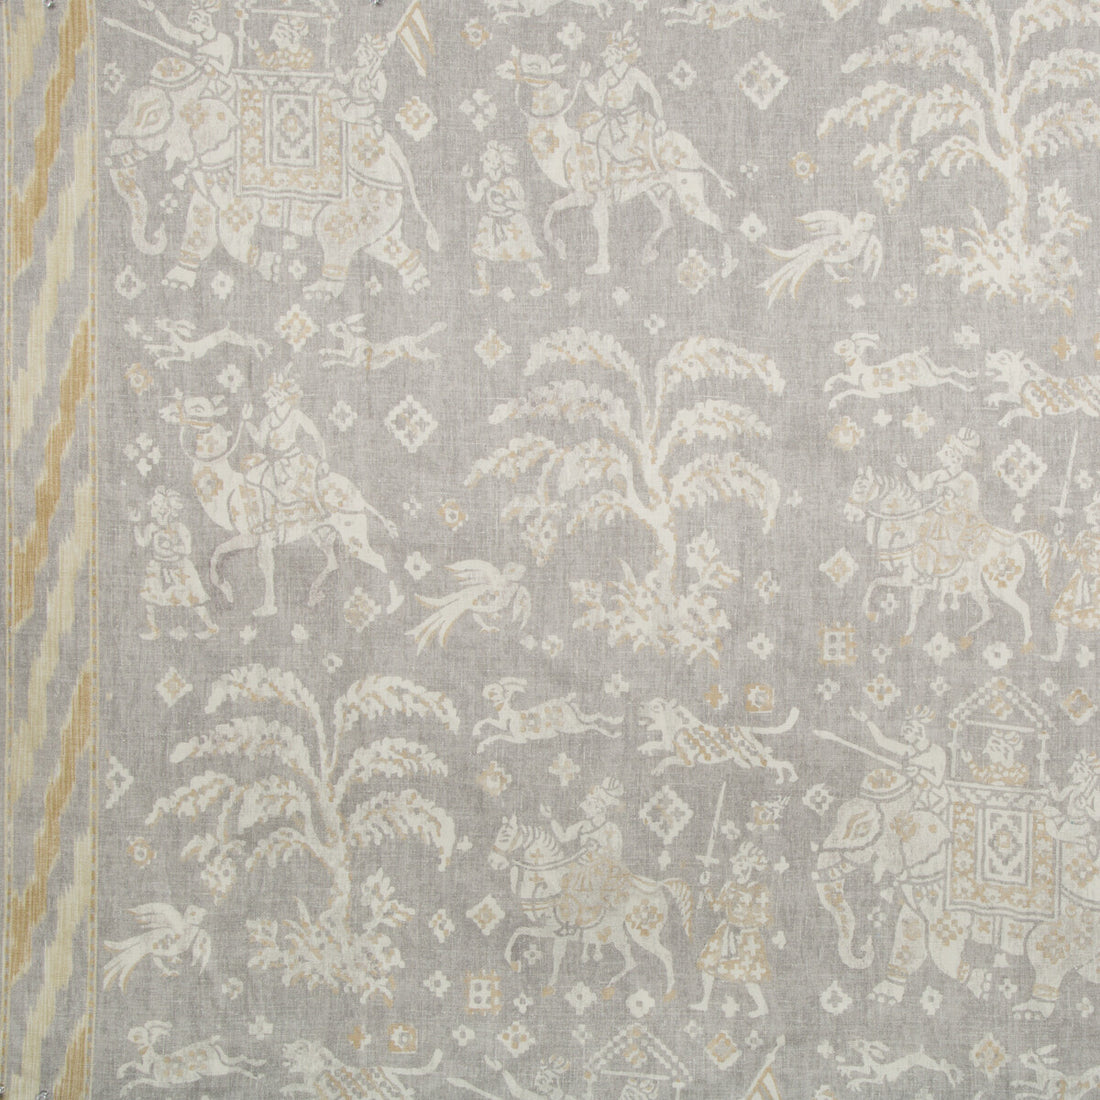 Aralam Print fabric in flint/rye color - pattern 8015175.116.0 - by Brunschwig &amp; Fils in the Cape Comorin collection